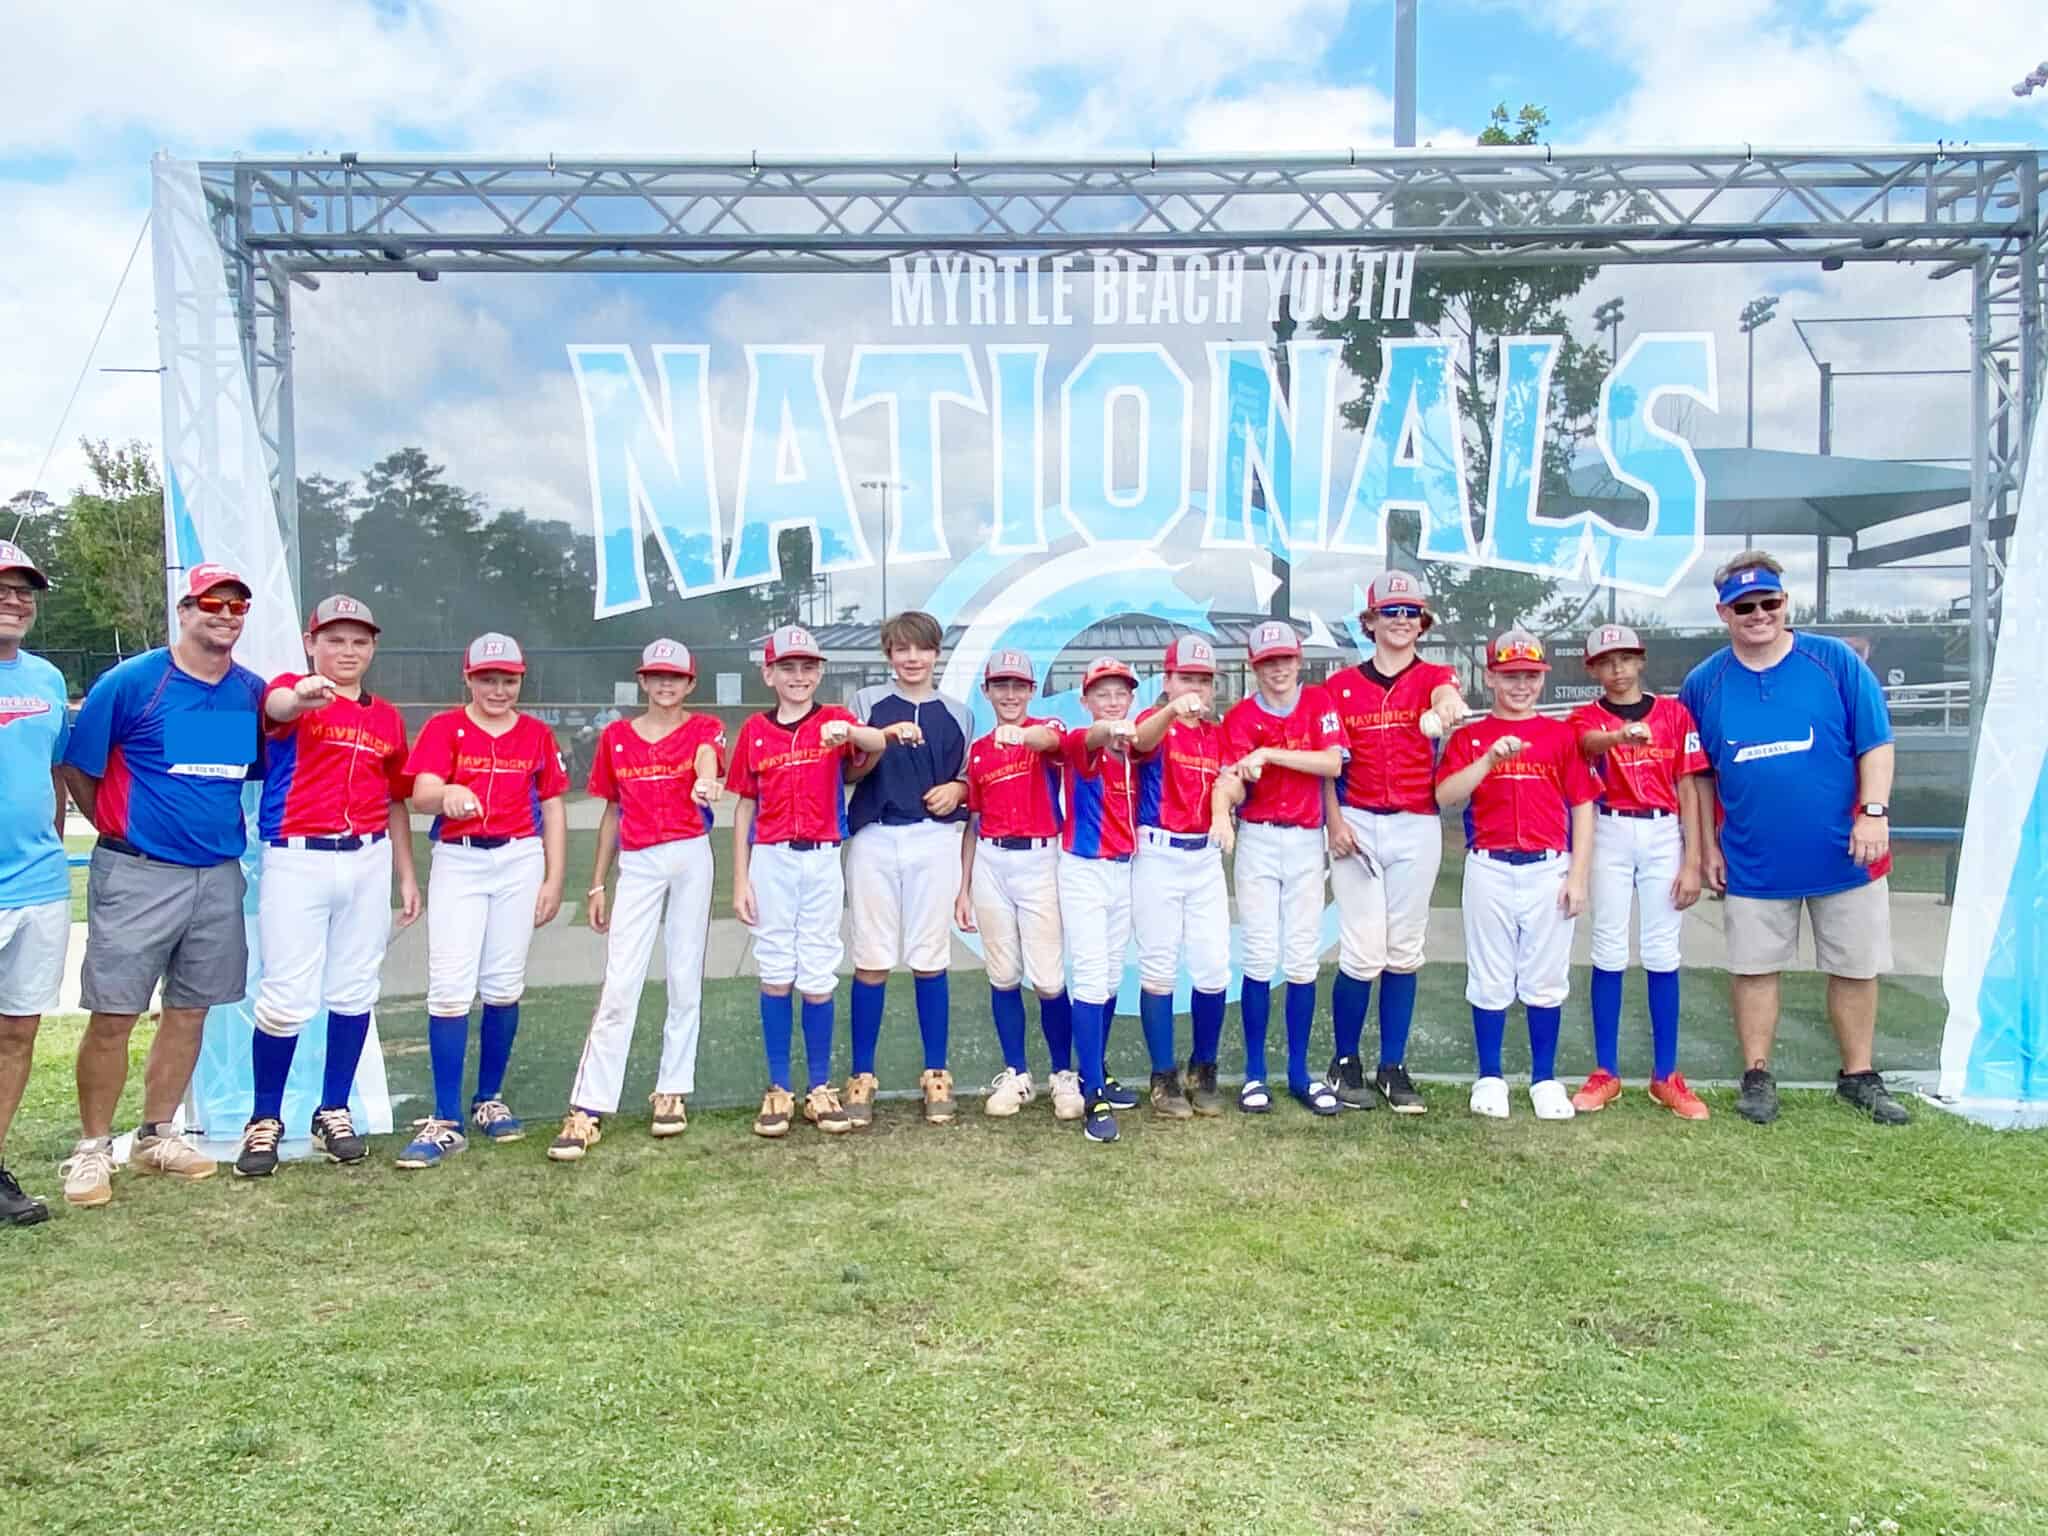 Myrtle Beach {Youth Baseball Nationals} Dixie Delights